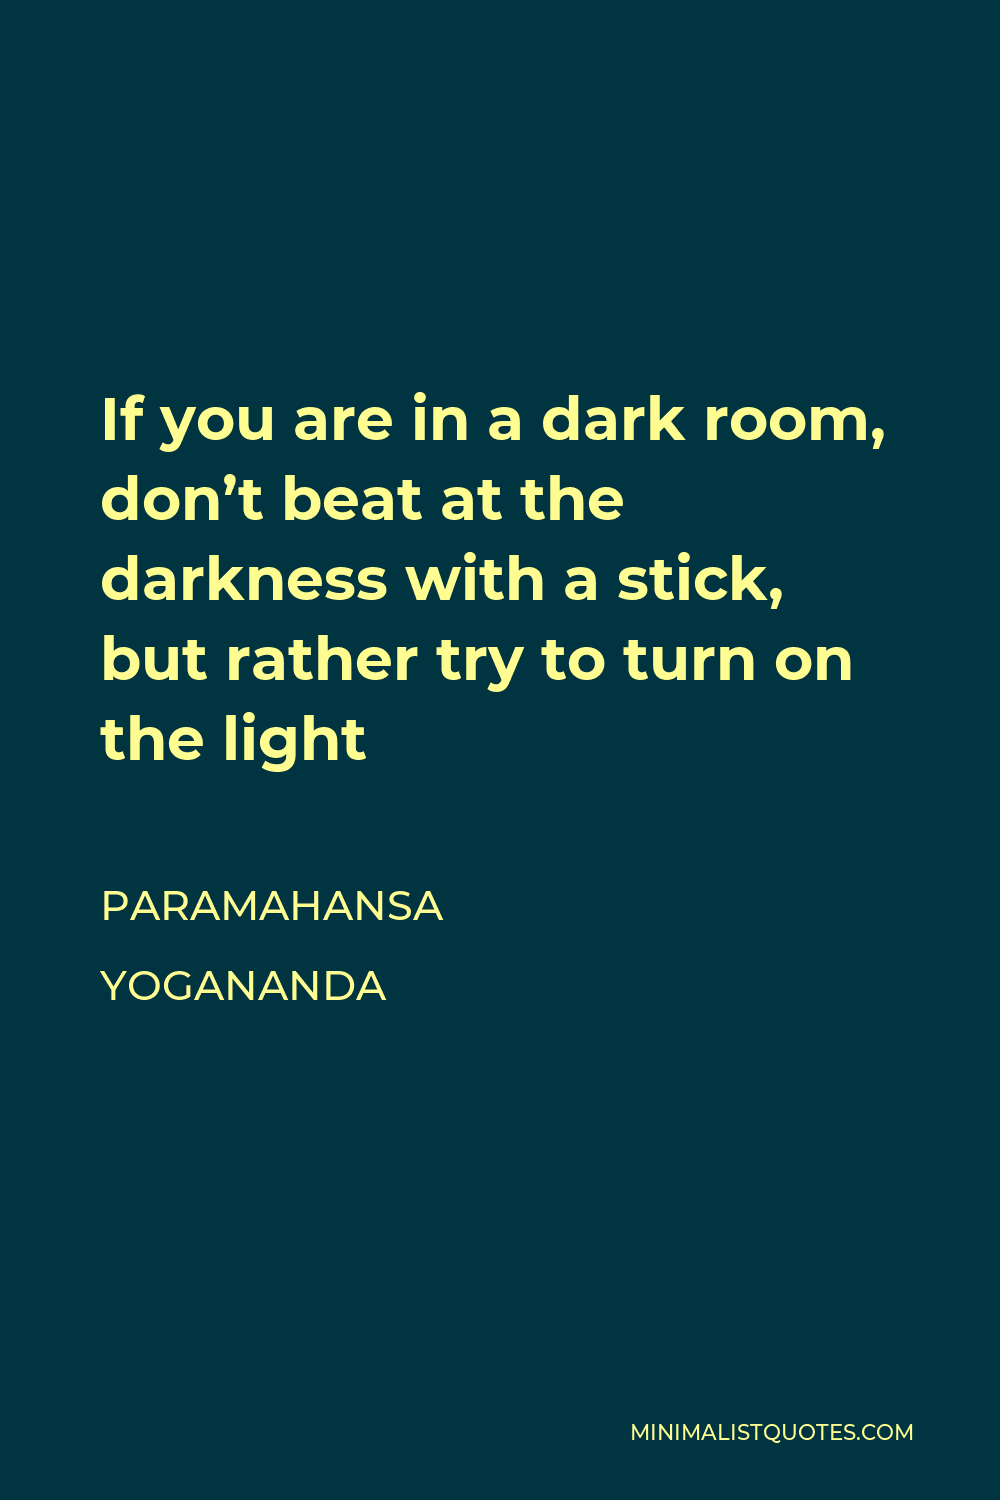 Paramahansa Yogananda Quote - If you are in a dark room, don’t beat at the darkness with a stick, but rather try to turn on the light